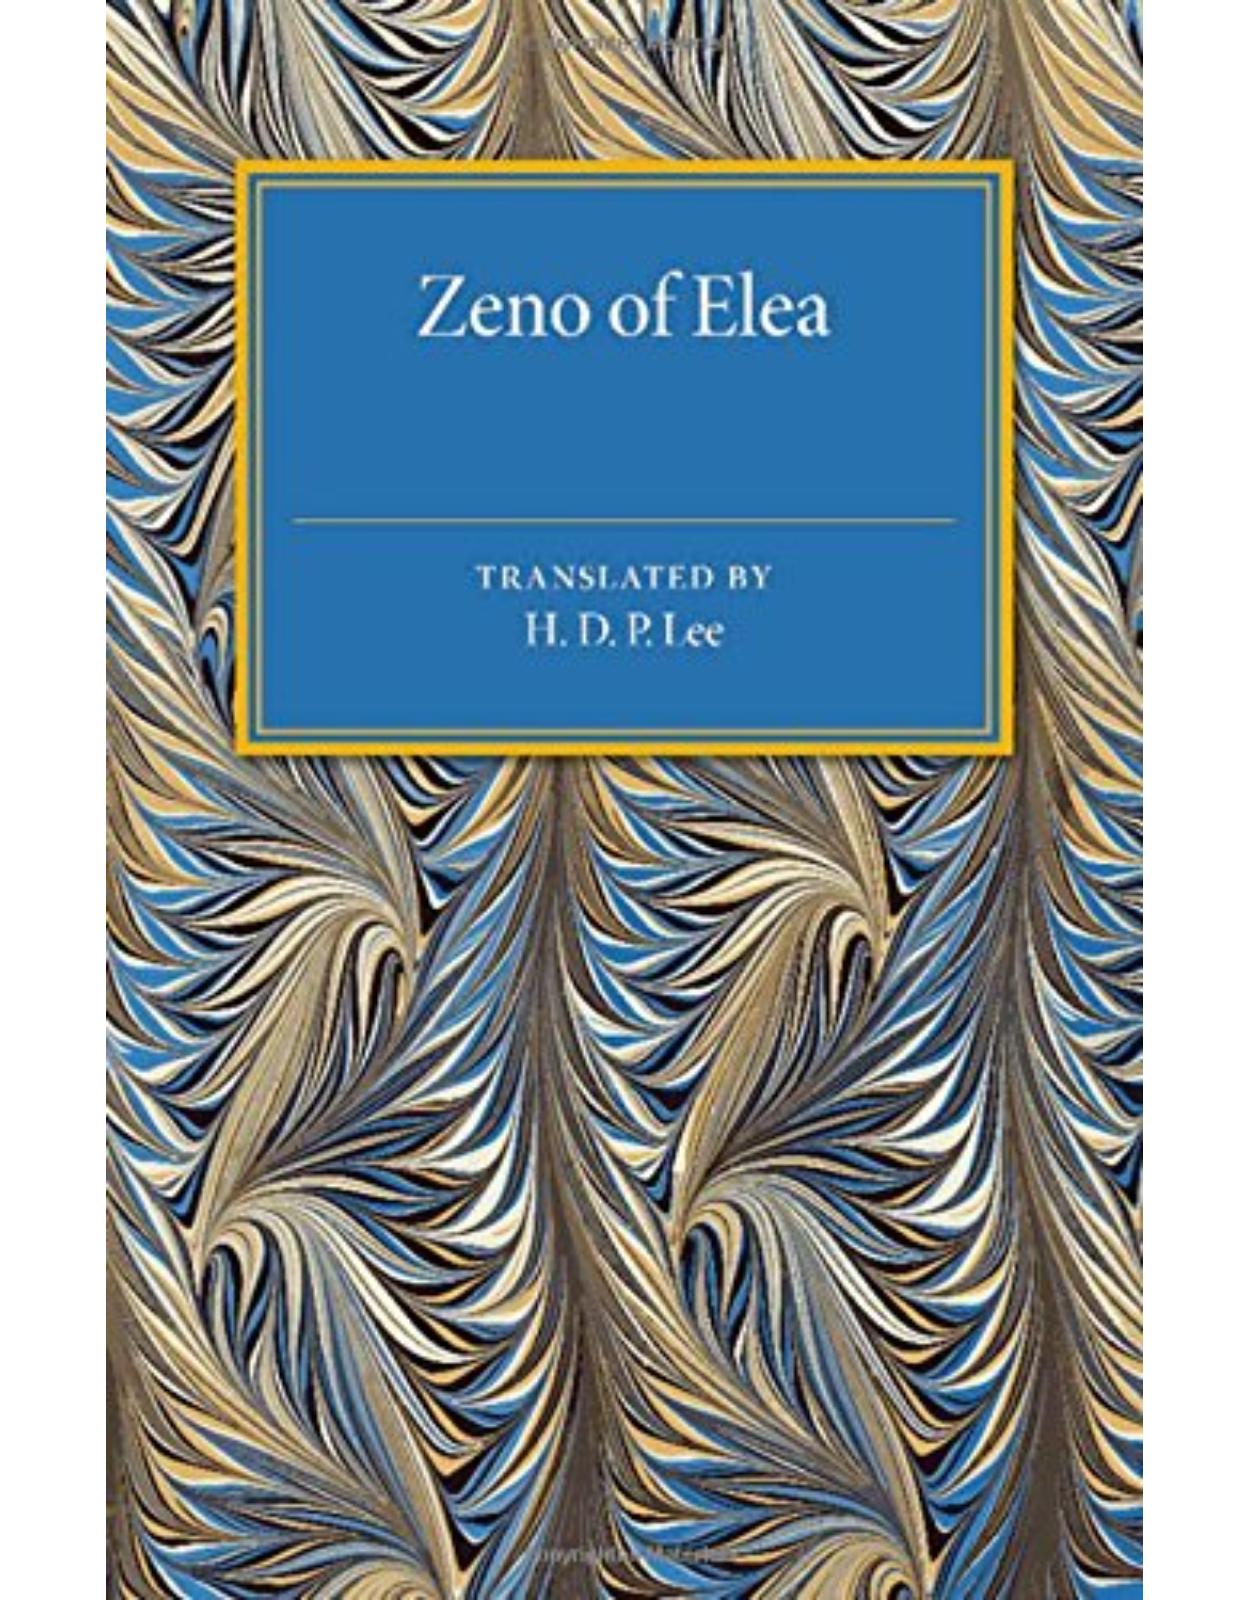 Zeno of Elea: A Text, with Translation and Notes (Cambridge Classical Studies)